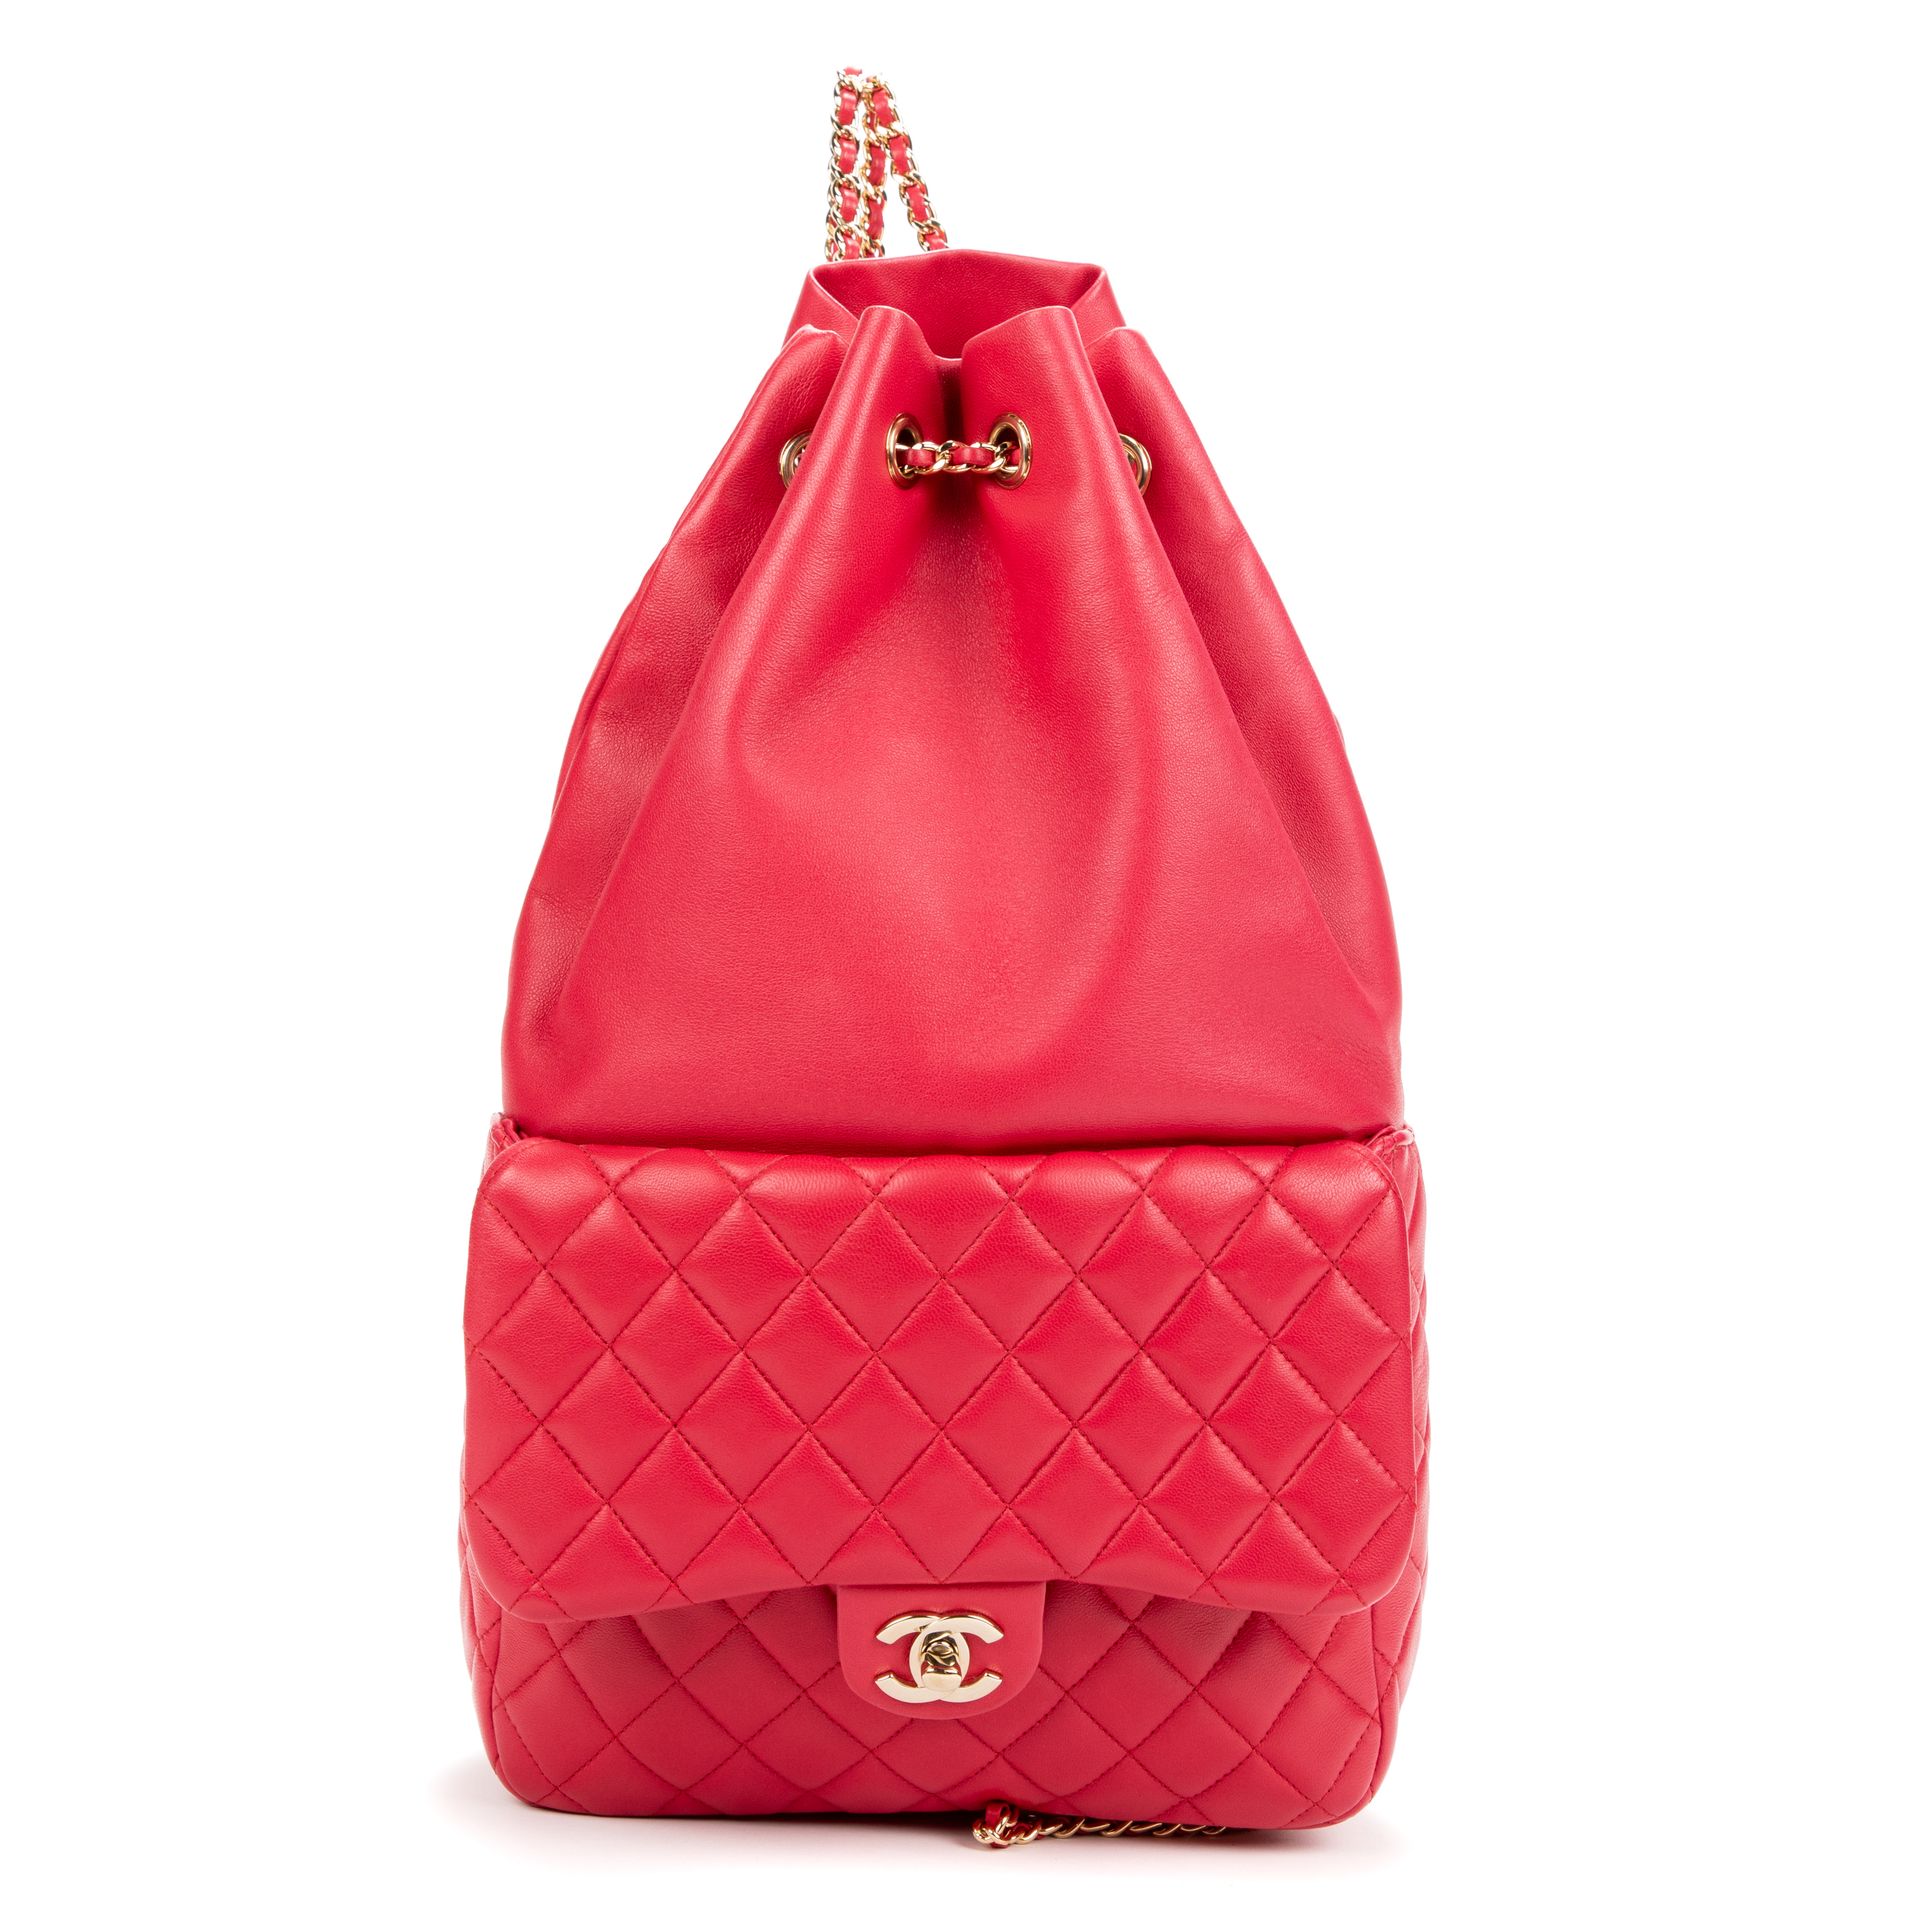 Chanel CHANEL Paris backpack in pink lambskin - Pink fabric inside - Gold metal &hellip;